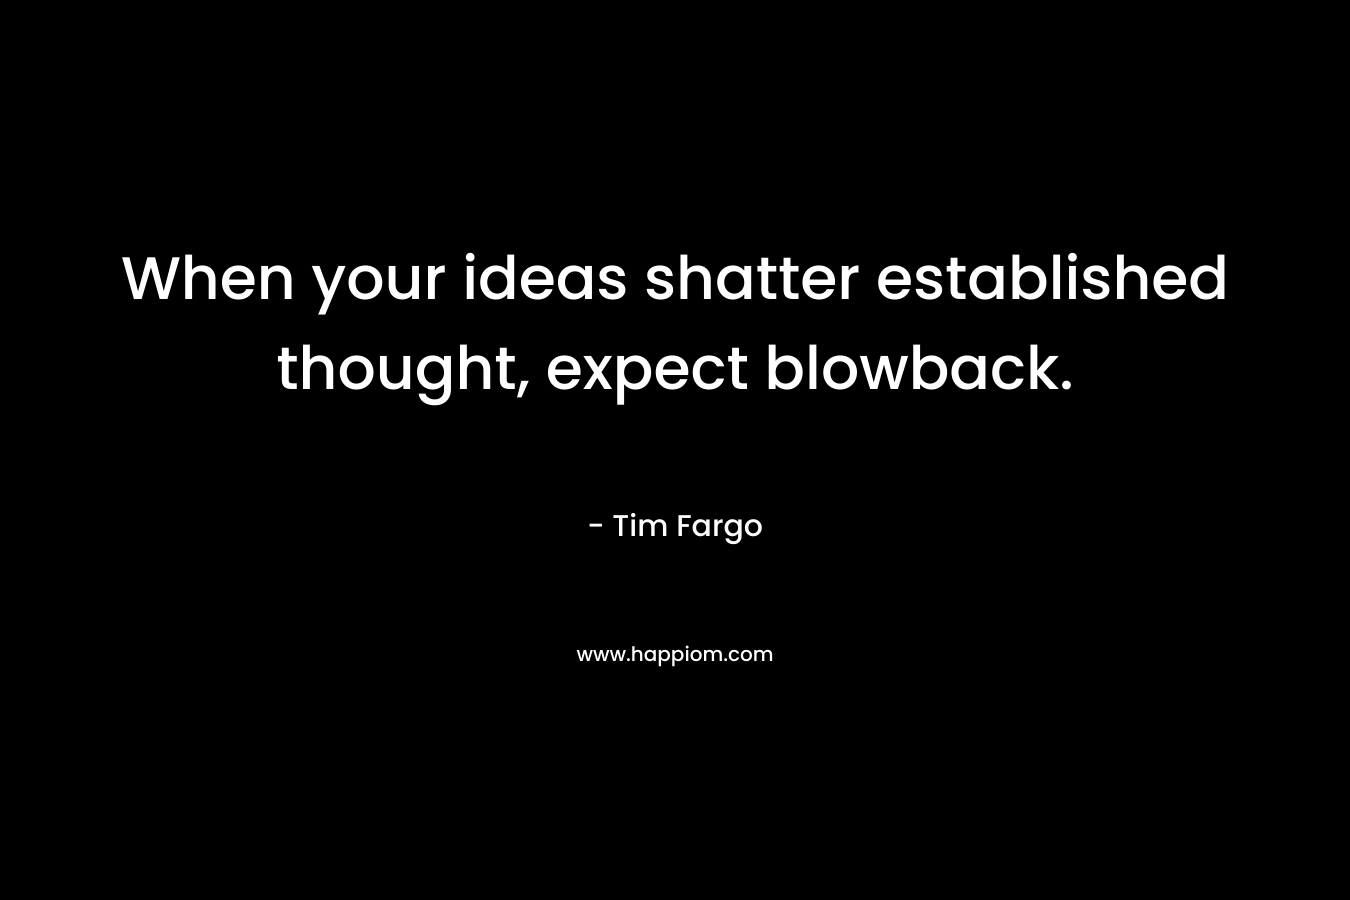 When your ideas shatter established thought, expect blowback. – Tim Fargo